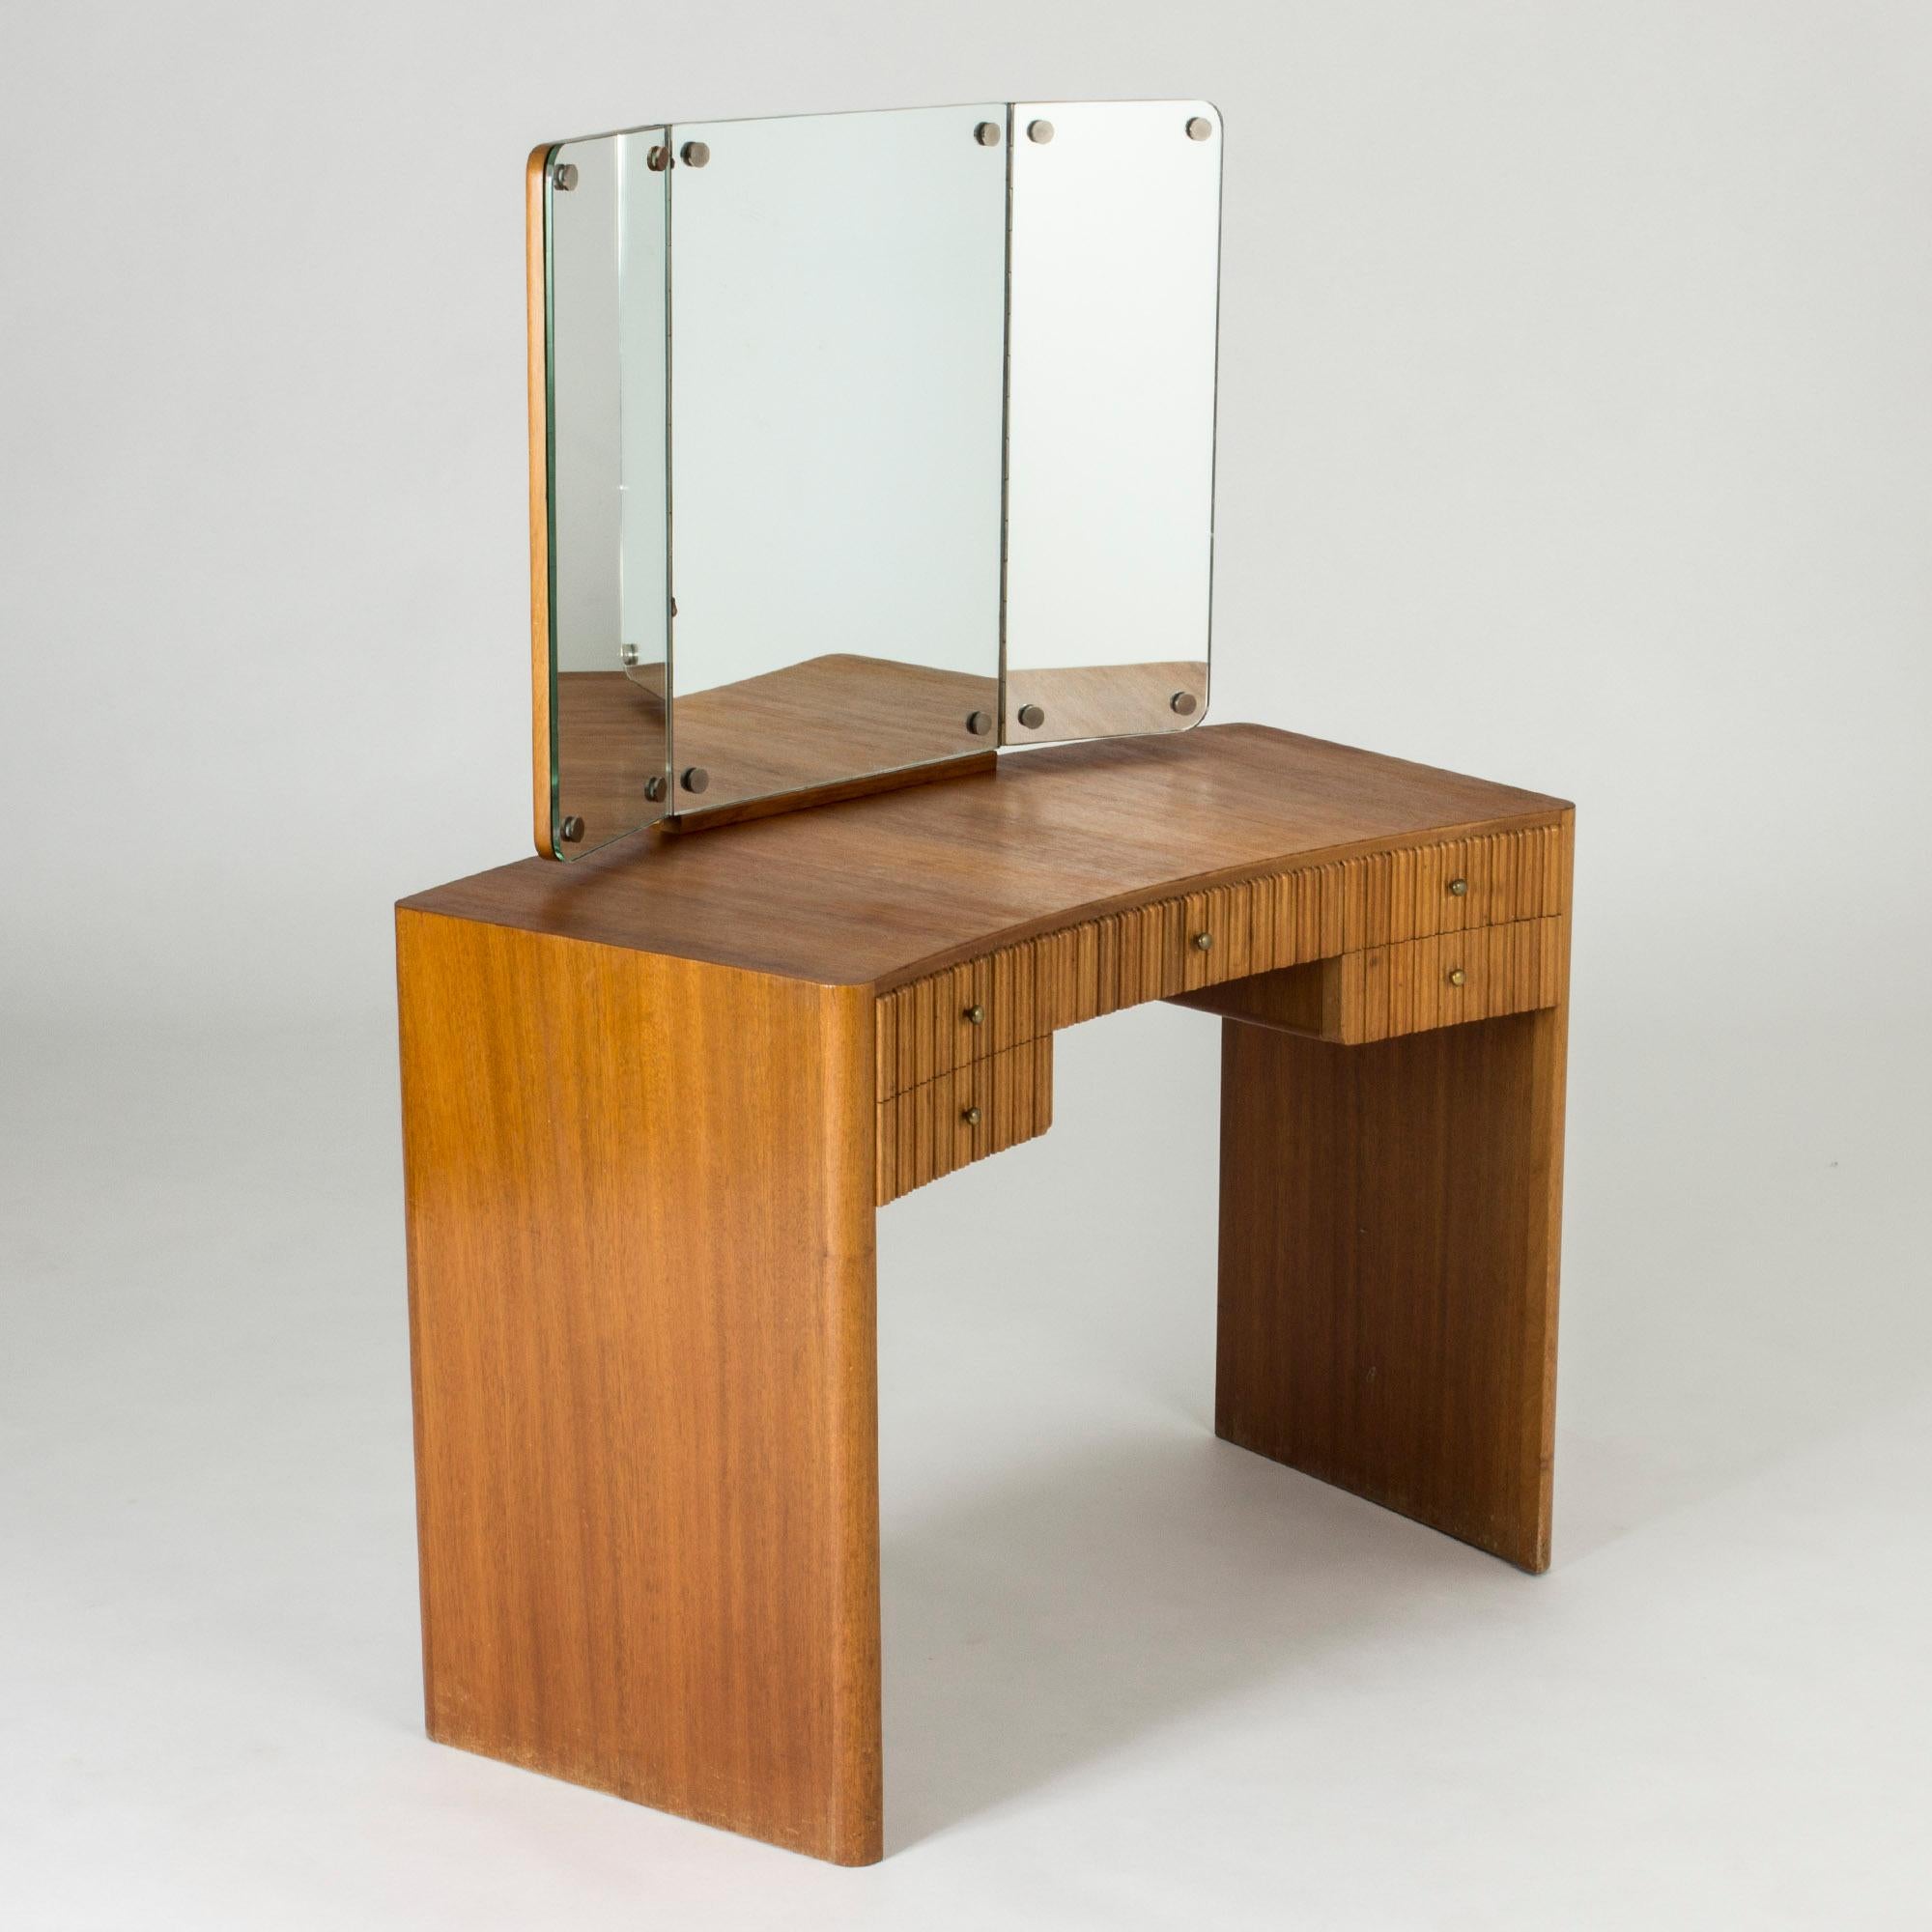 Beautiful mahogany dressing table by Carl-Axel Acking, with clean rounded lines. Mirror in three sections with adjustable sides. Striking “corrugated” look of the wood on the drawer fronts, neat brass knobs.